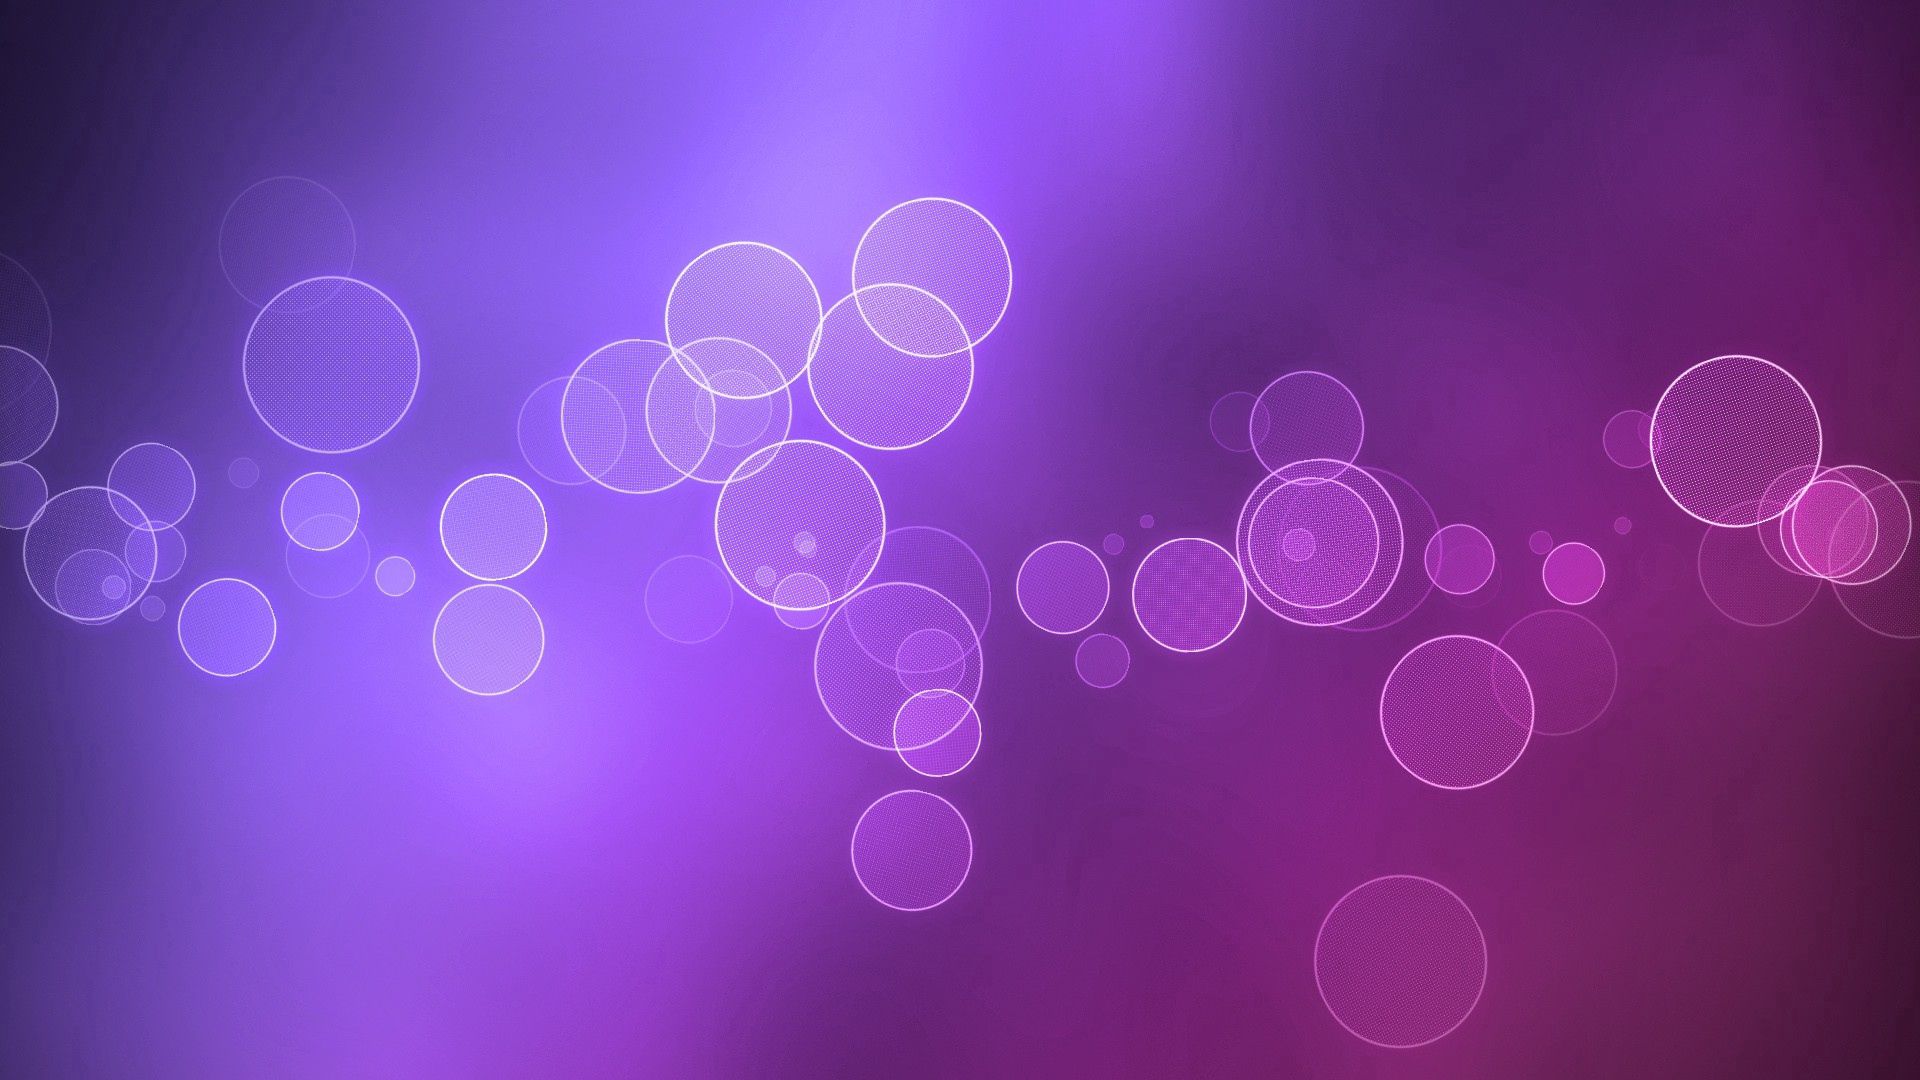 Brilliance lilac, shine, circles, abstract 8k Backgrounds